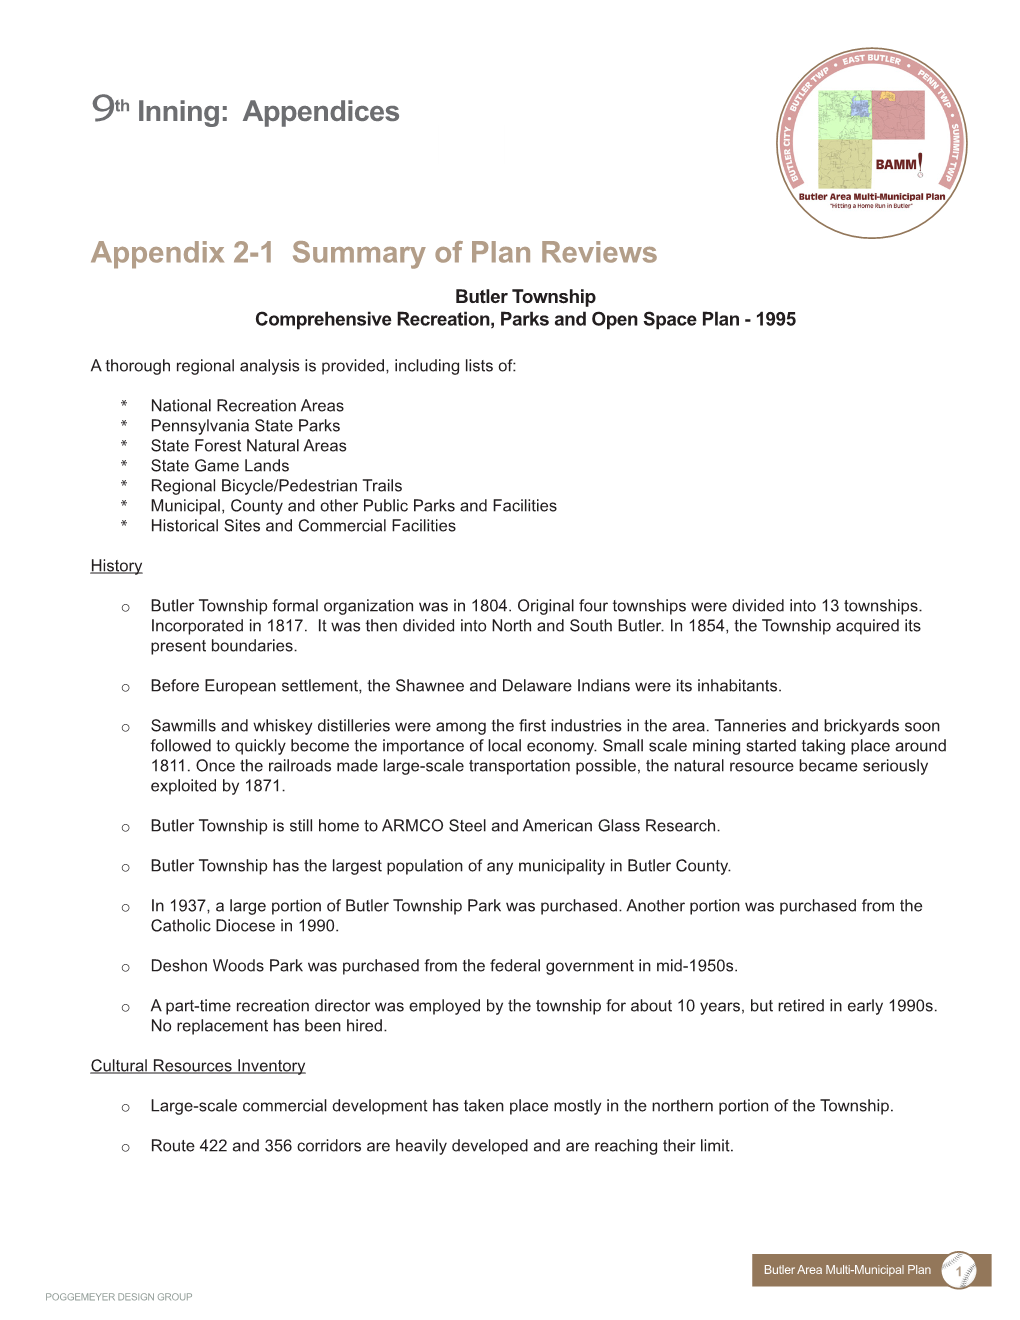 Appendix 2-1 Summary of Plan Reviews Butler Township Comprehensive Recreation, Parks and Open Space Plan - 1995